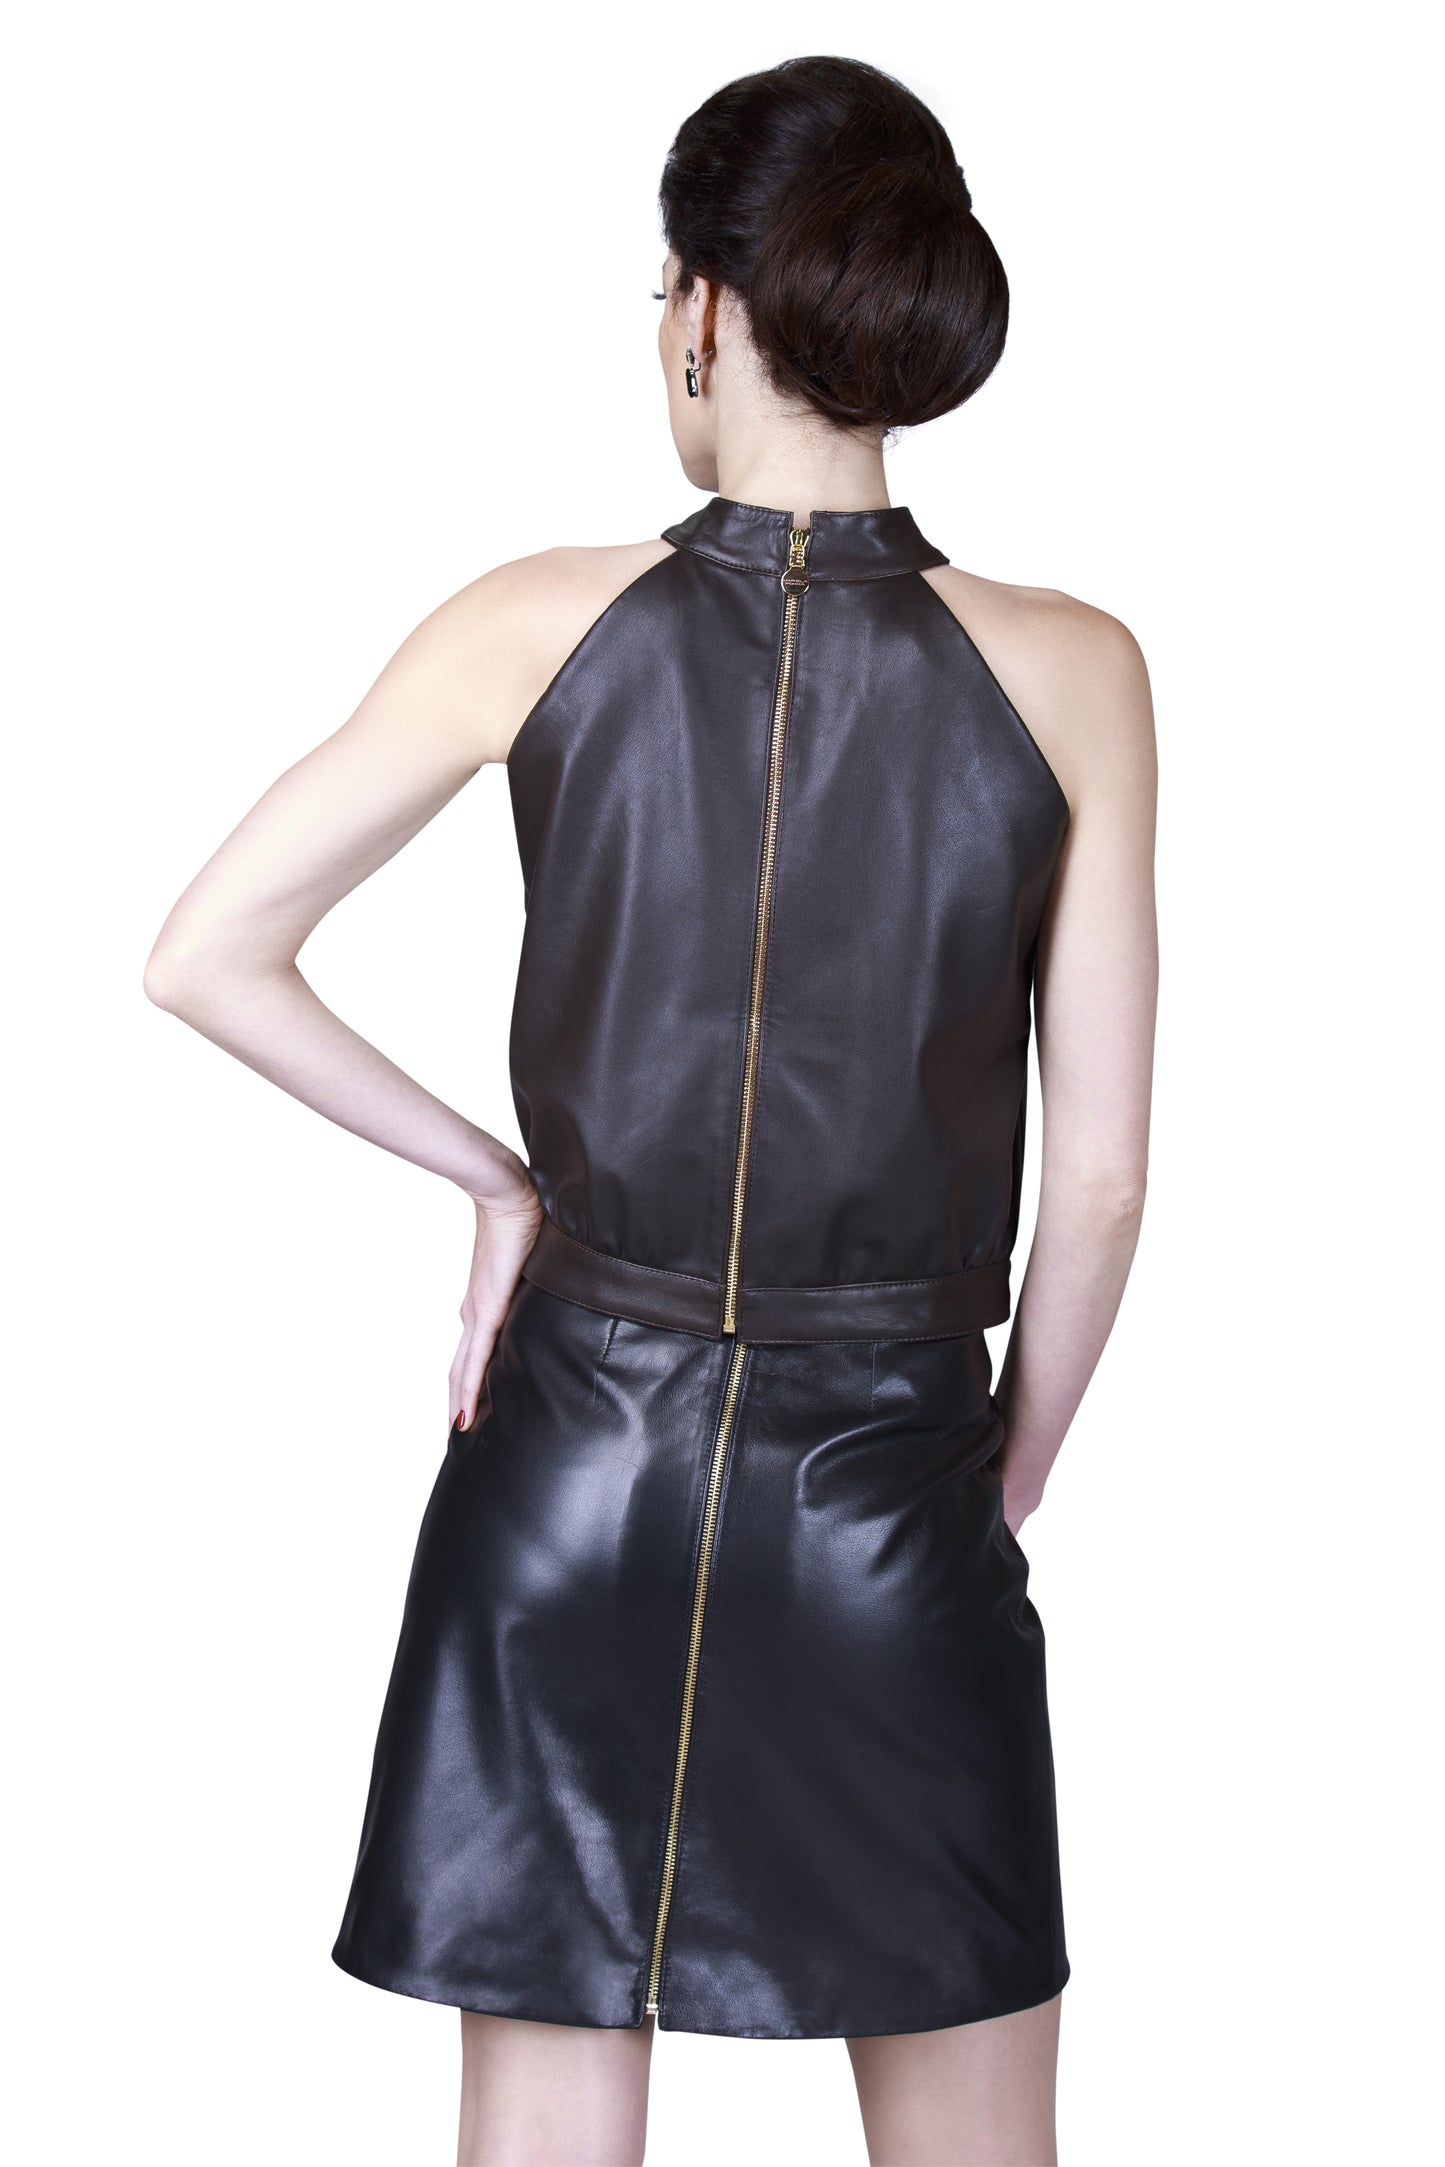 A-Line Trimmed Reindeer Leather Skirt  Limited Edition